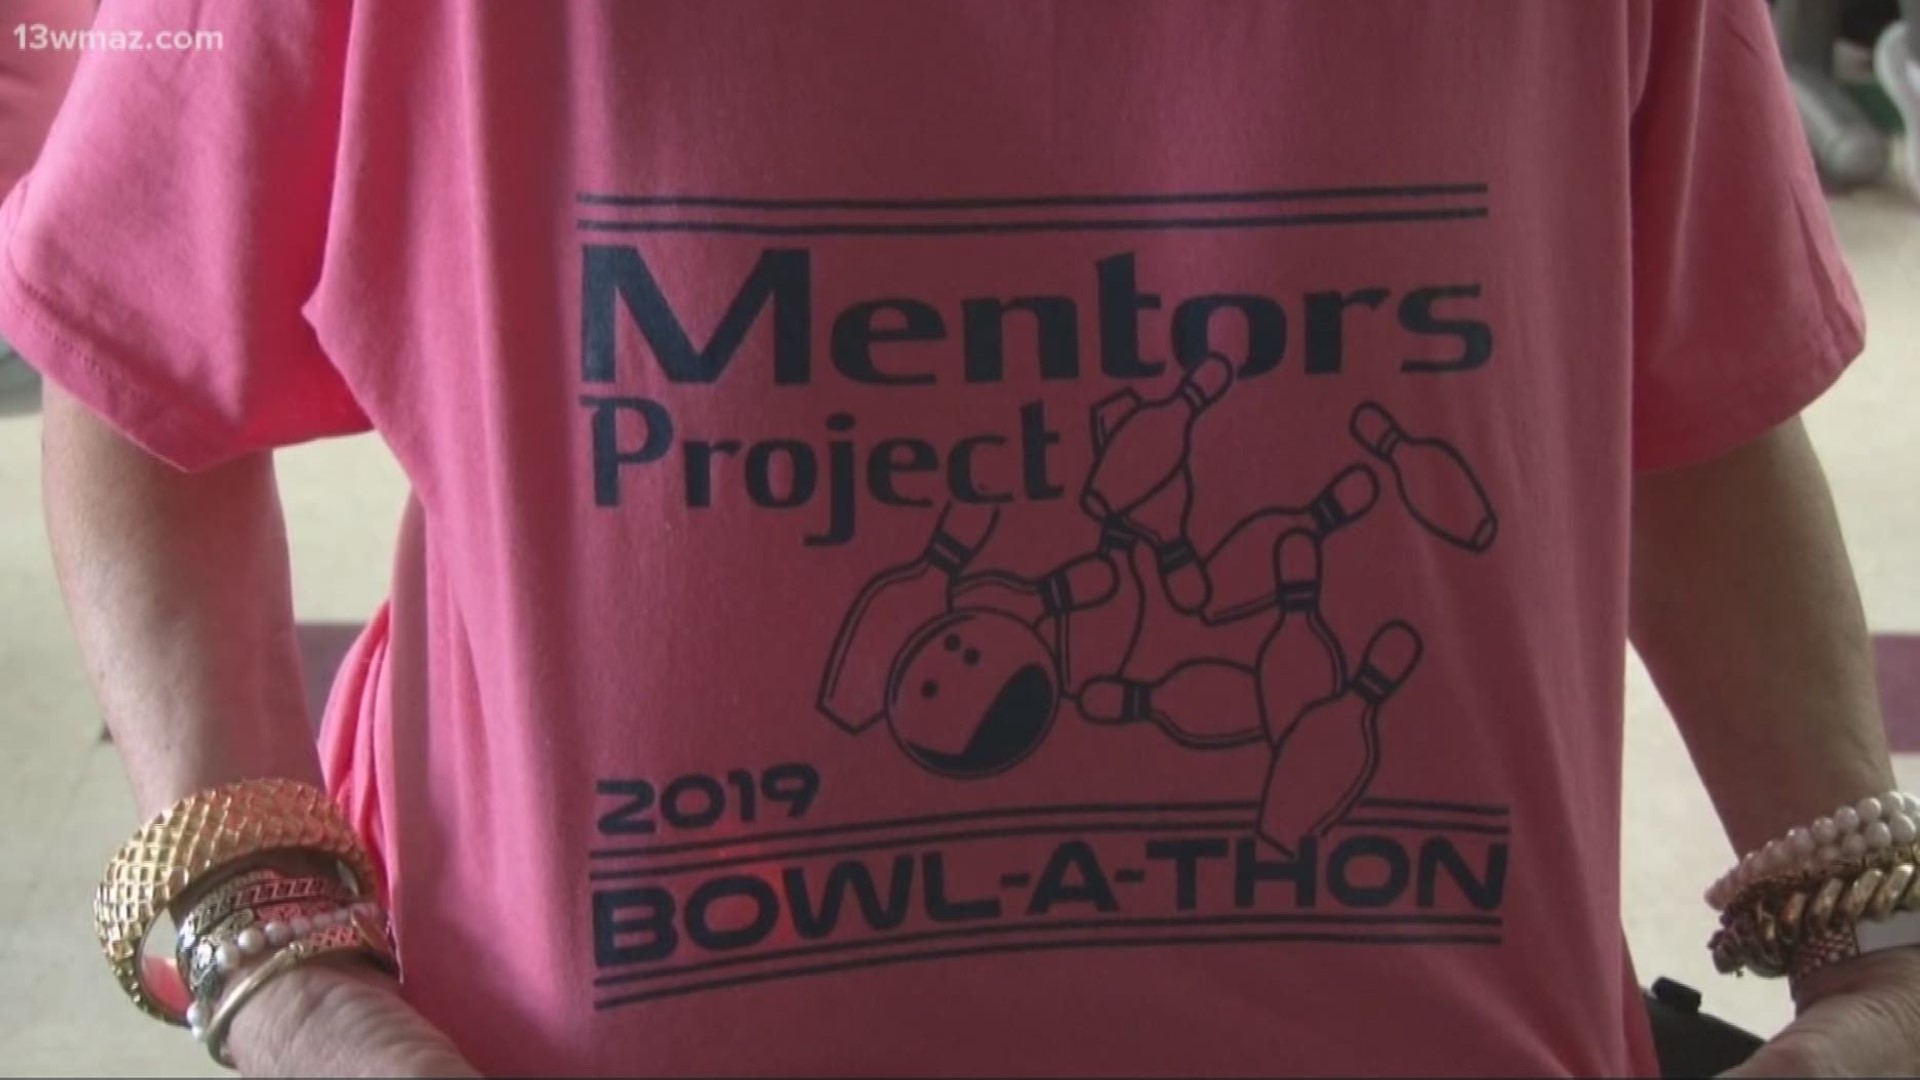 The Mentors Project of Bibb County hosted their 20th annual Bowl-a-thon Saturday. Kids got to spend quality time with their mentors all while raising money.